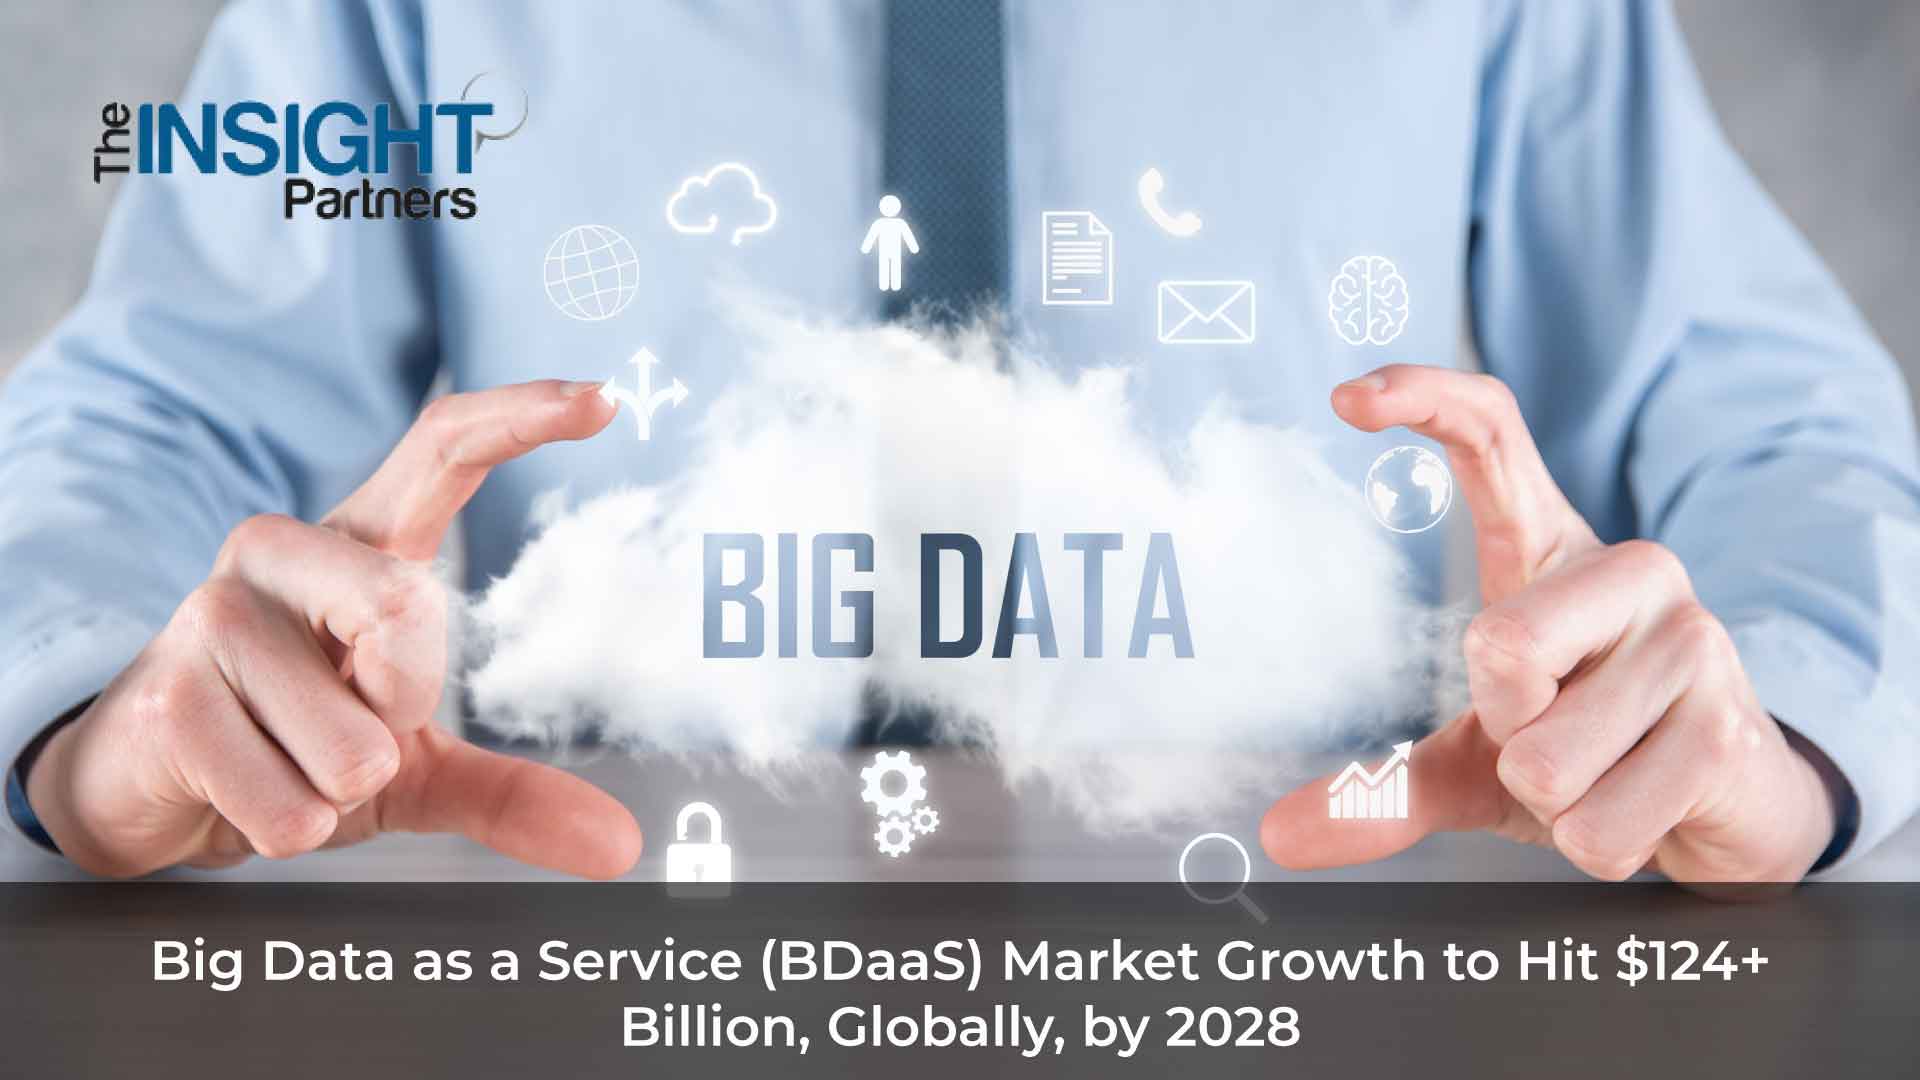 Big Data as a Service (BDaaS) Market Growth to Hit $124+ Billion, Globally, by 2028 – Growth Report by The Insight Partners